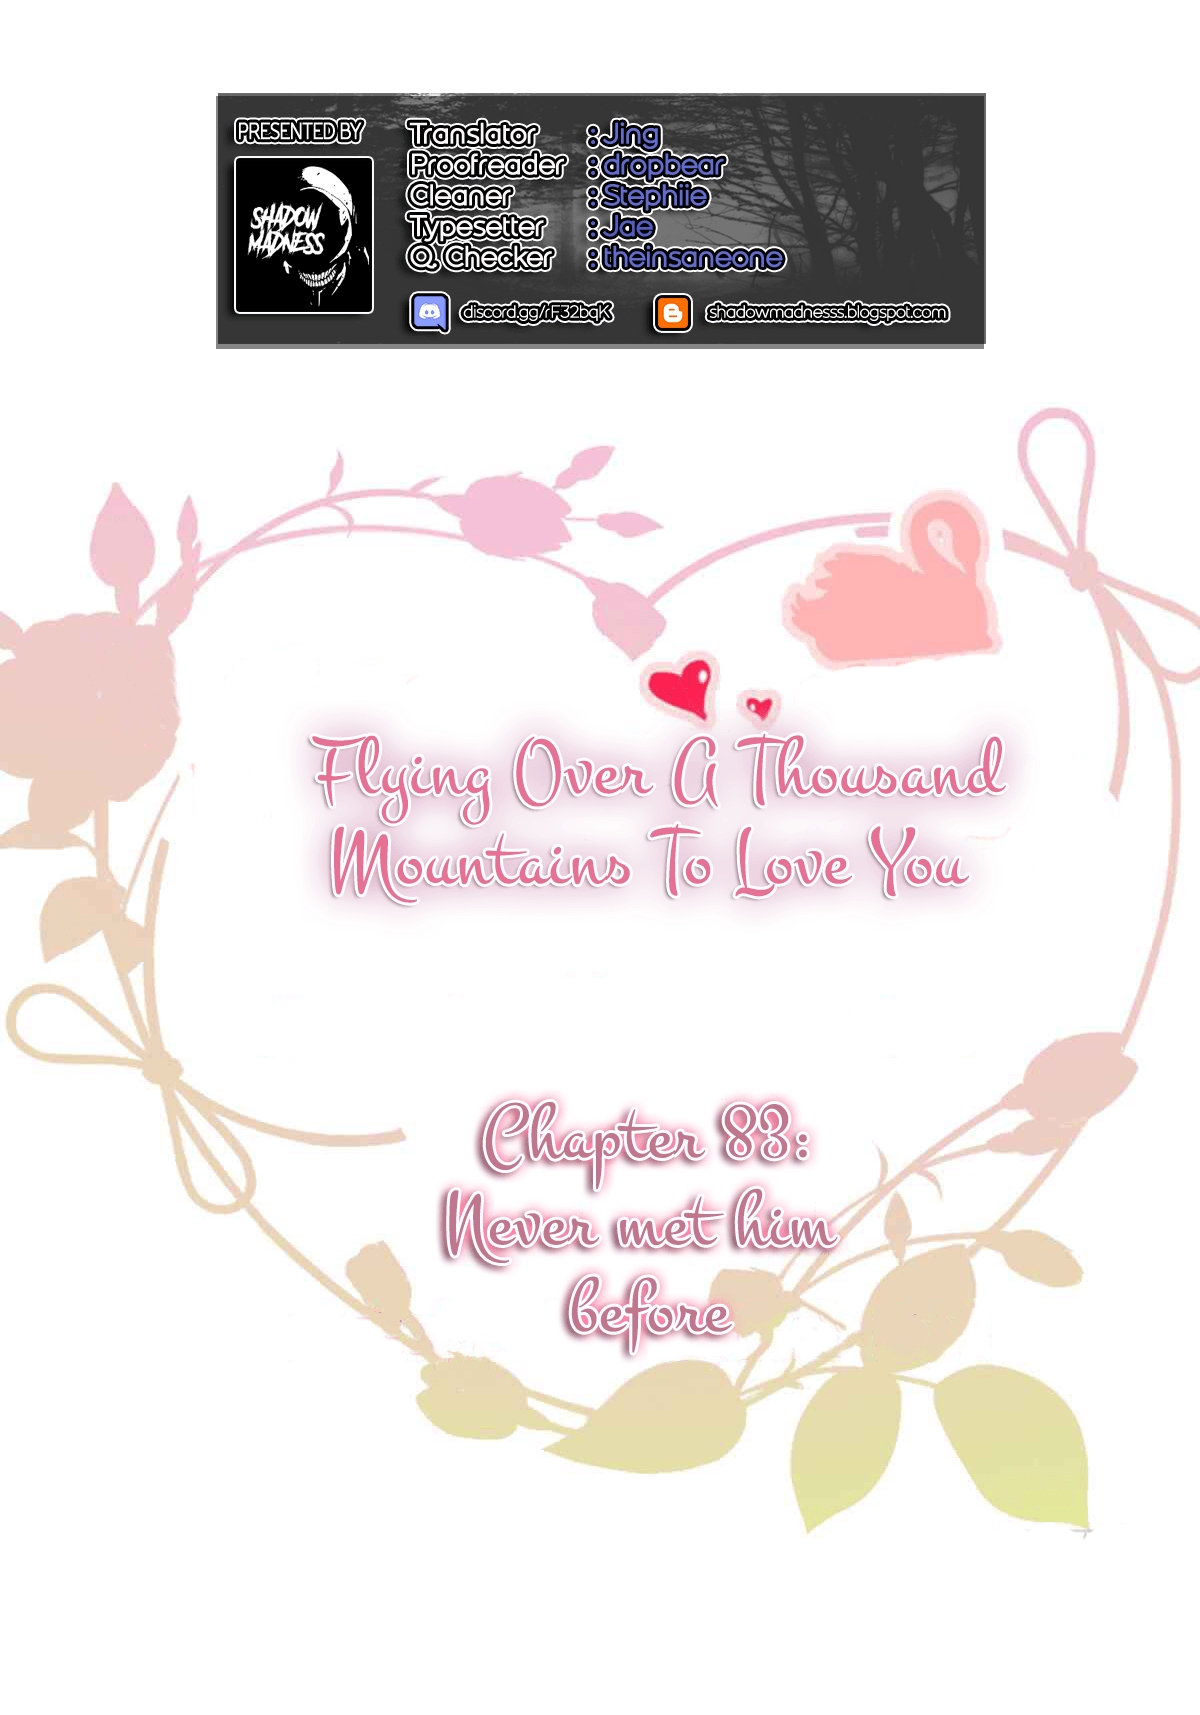 Flying Over a Thousand Mountains to Love You Ch. 83 Never met him before